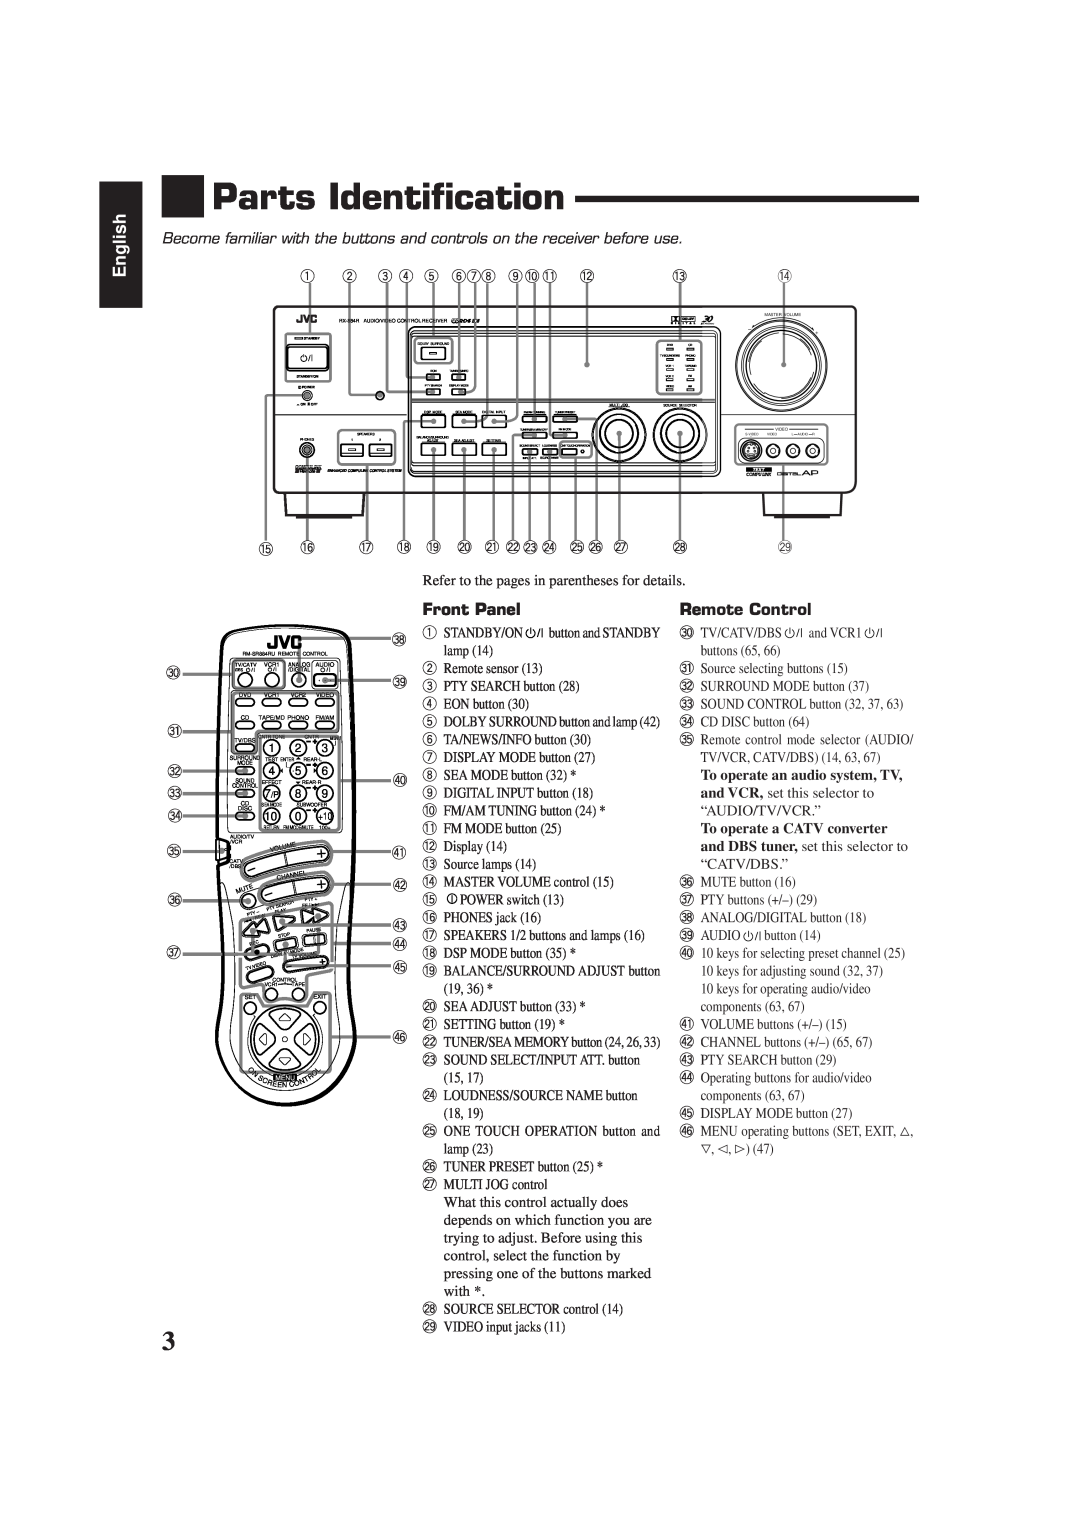 JVC RX-884RBK manual Parts Identification, English, Front Panel, Remote Control 